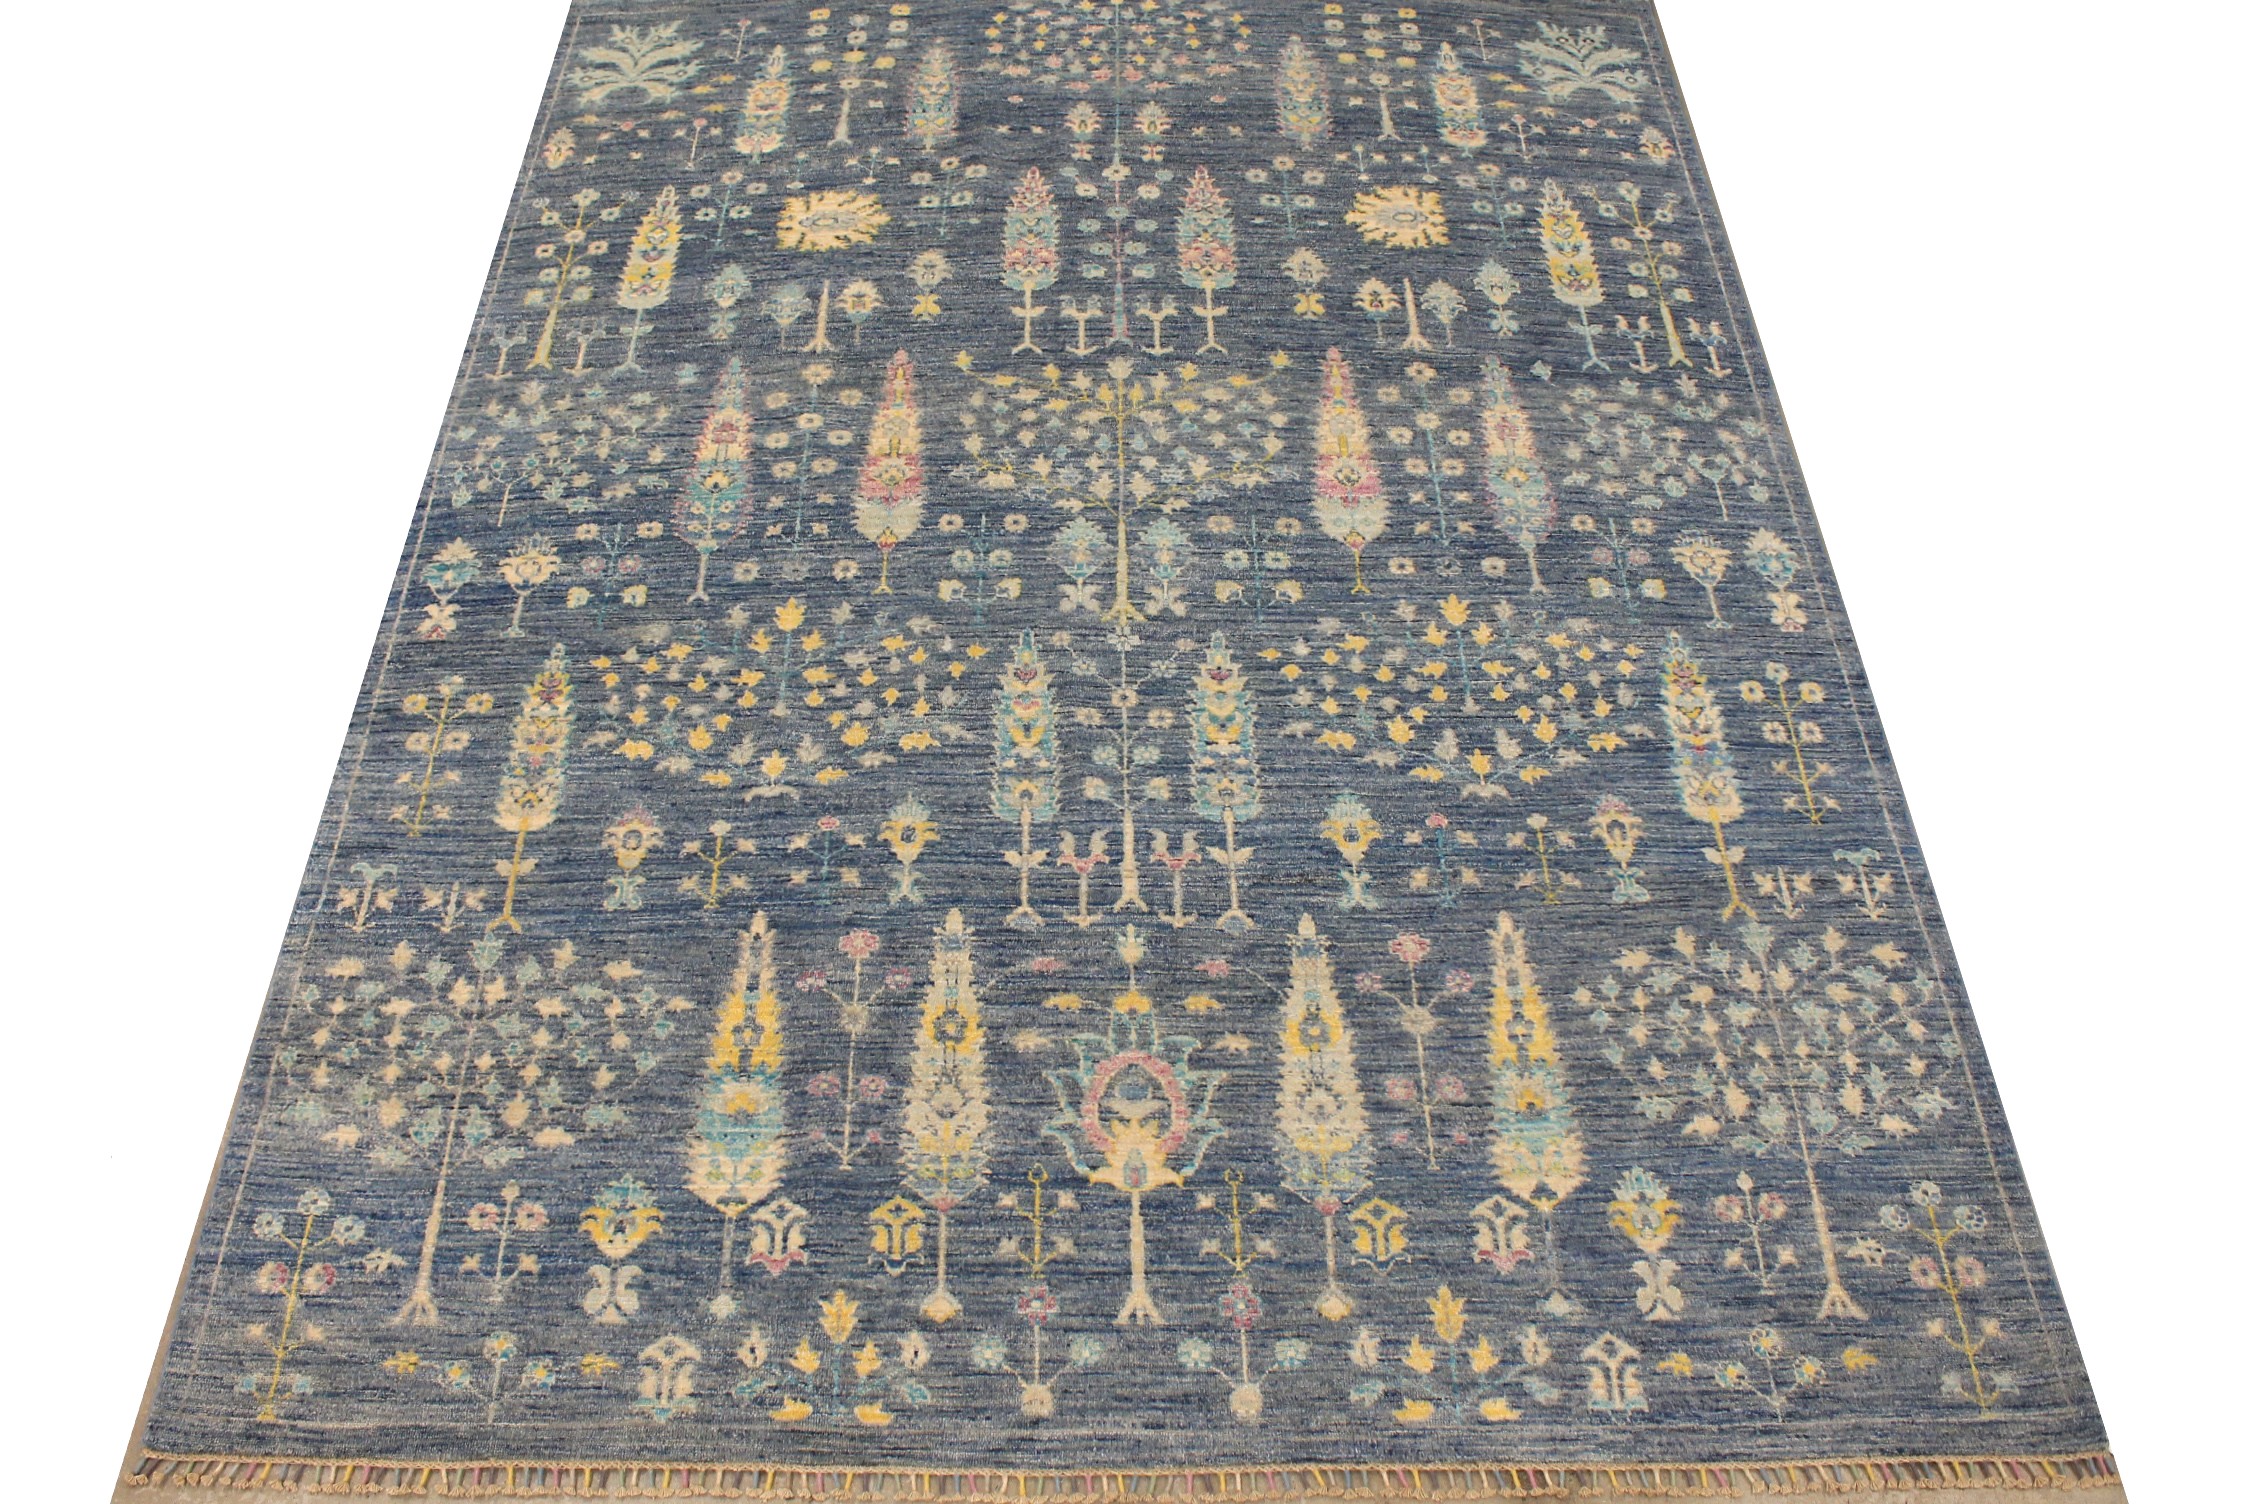 8x10 Aryana & Antique Revivals Hand Knotted  Area Rug - MR026646